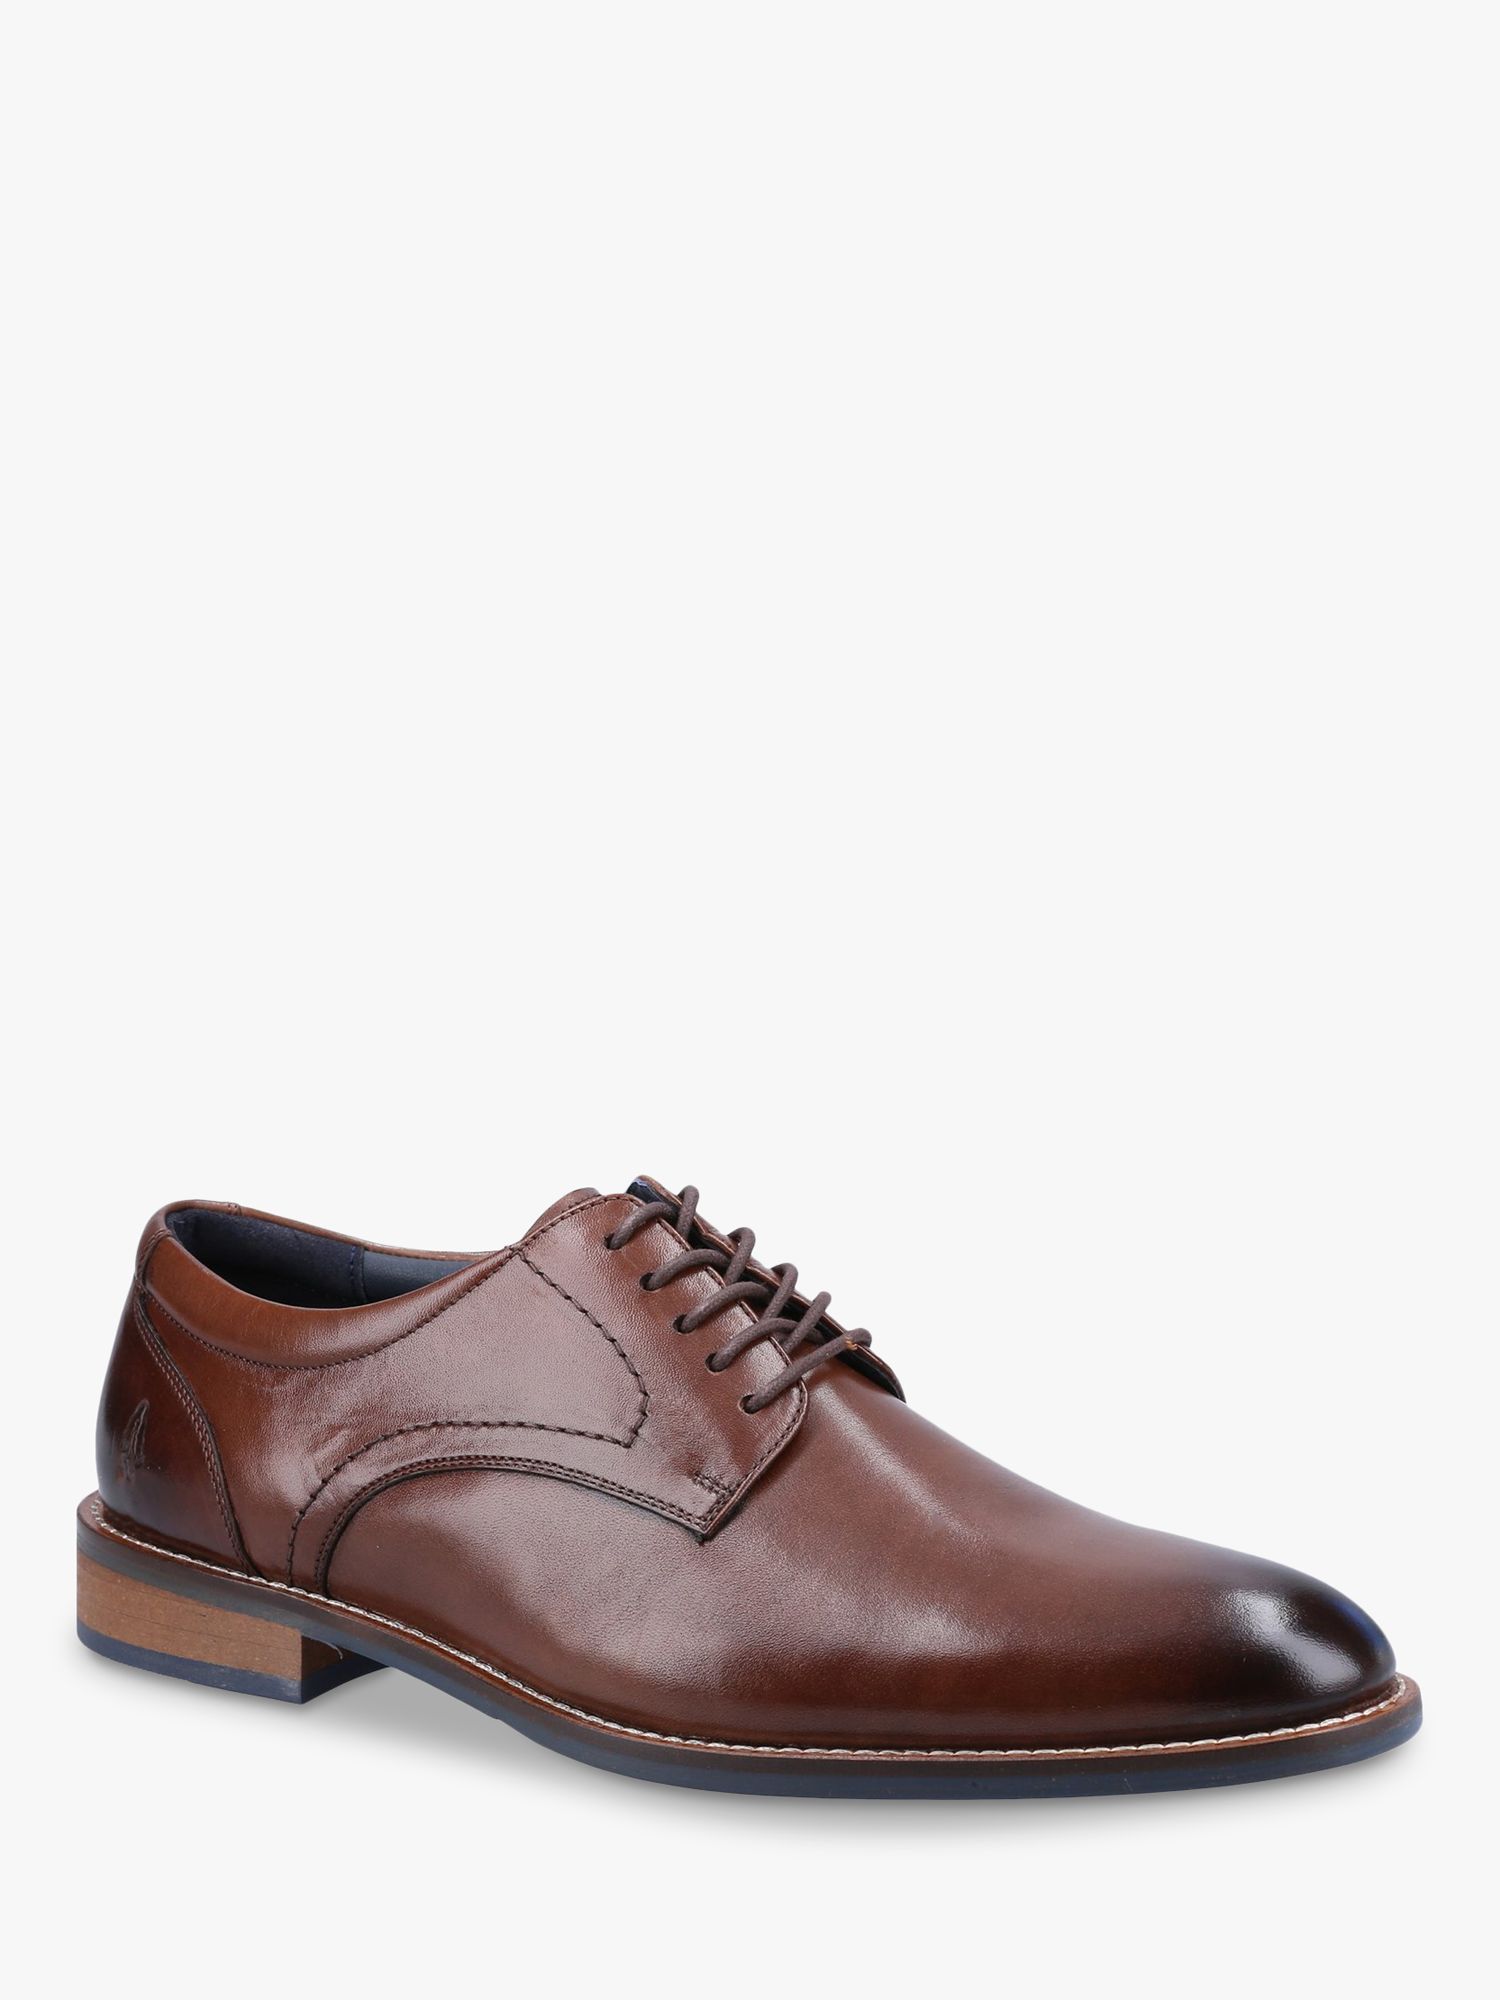 Hush Puppies Damien Leather Derby Shoes, Chocolate, 6